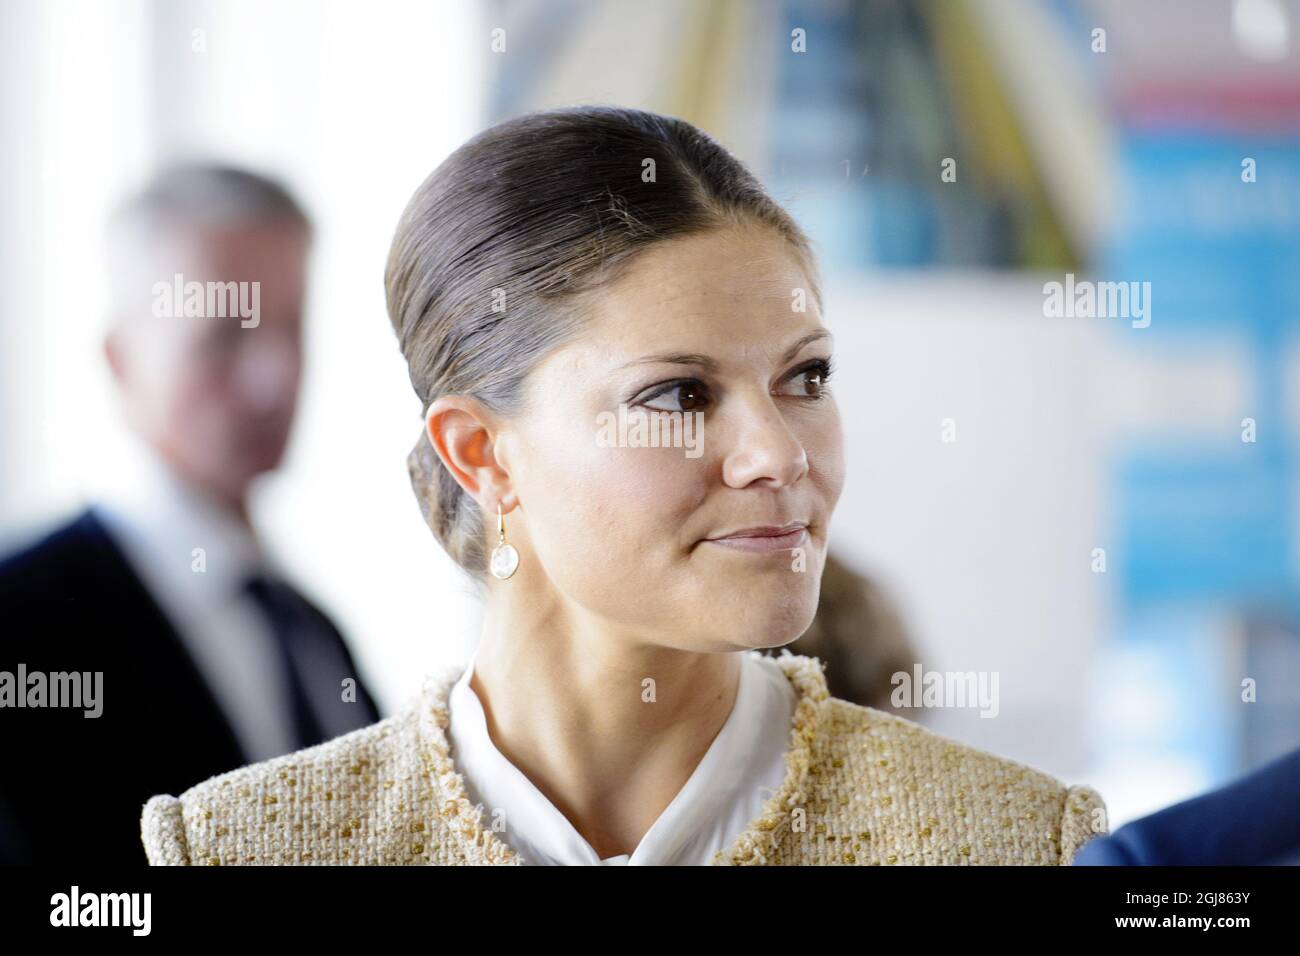 LUND 2013-10-03 Crown Princess Victoria is seen during a visit to Ideon Gateway in Lund, Sweden, October 3, 2013. The Crown Princess couple accompanied Portugal's President Anibal Cavaco Silva and his wife Maria get an insight into how to build a brand new district for world-leading research and innovation. The President of Portugal is on a State visit to Sweden. Foto: Ludvig Thunman / TT / Kod 10600  Stock Photo